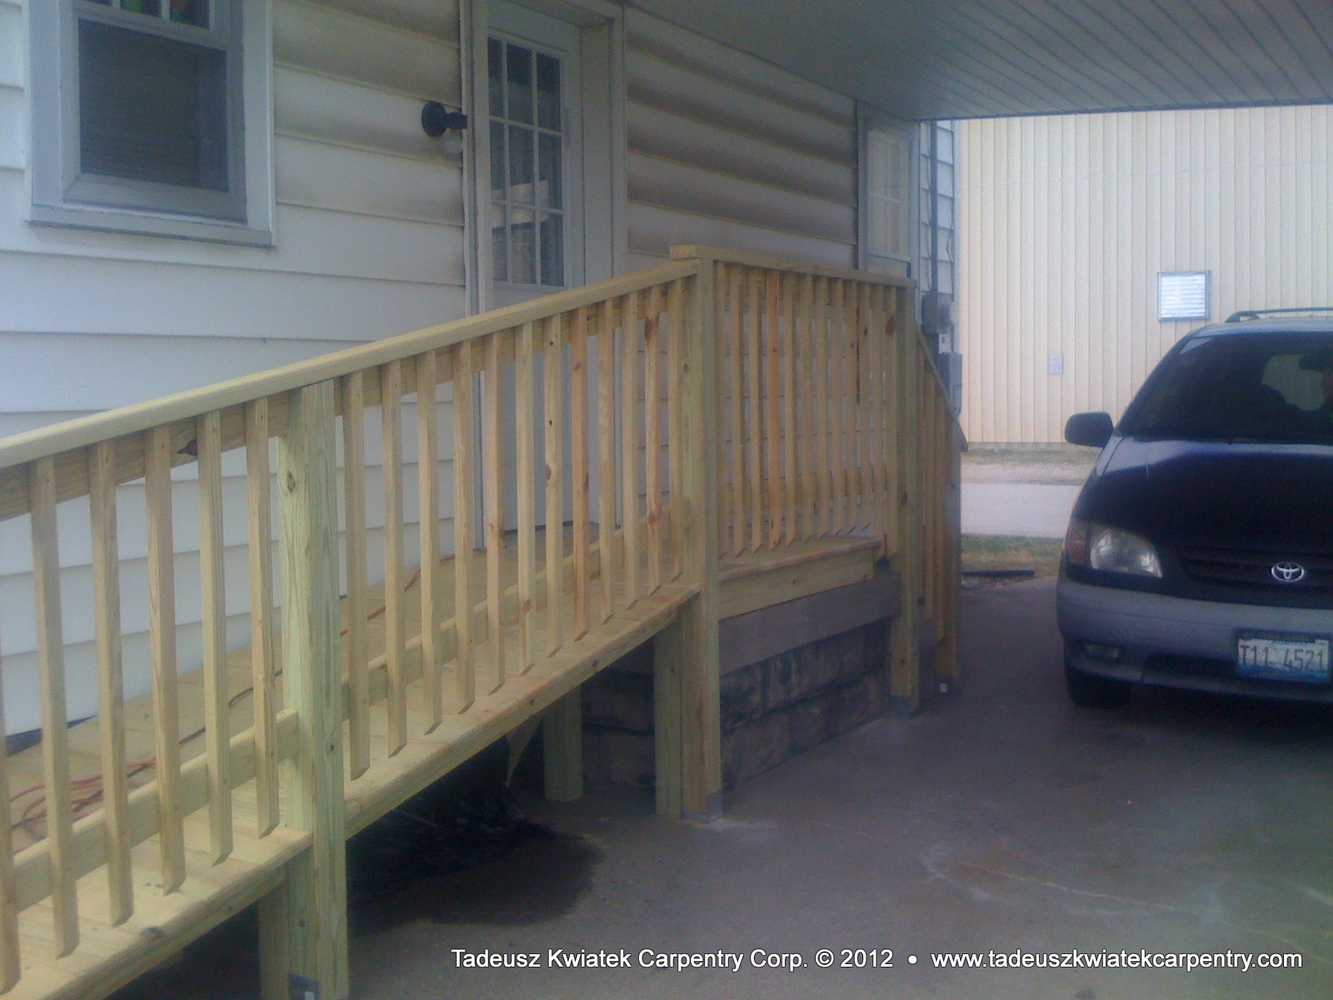 Small home remodel, Jasper, IN: deck and ramp, custom kitchen cabinets...